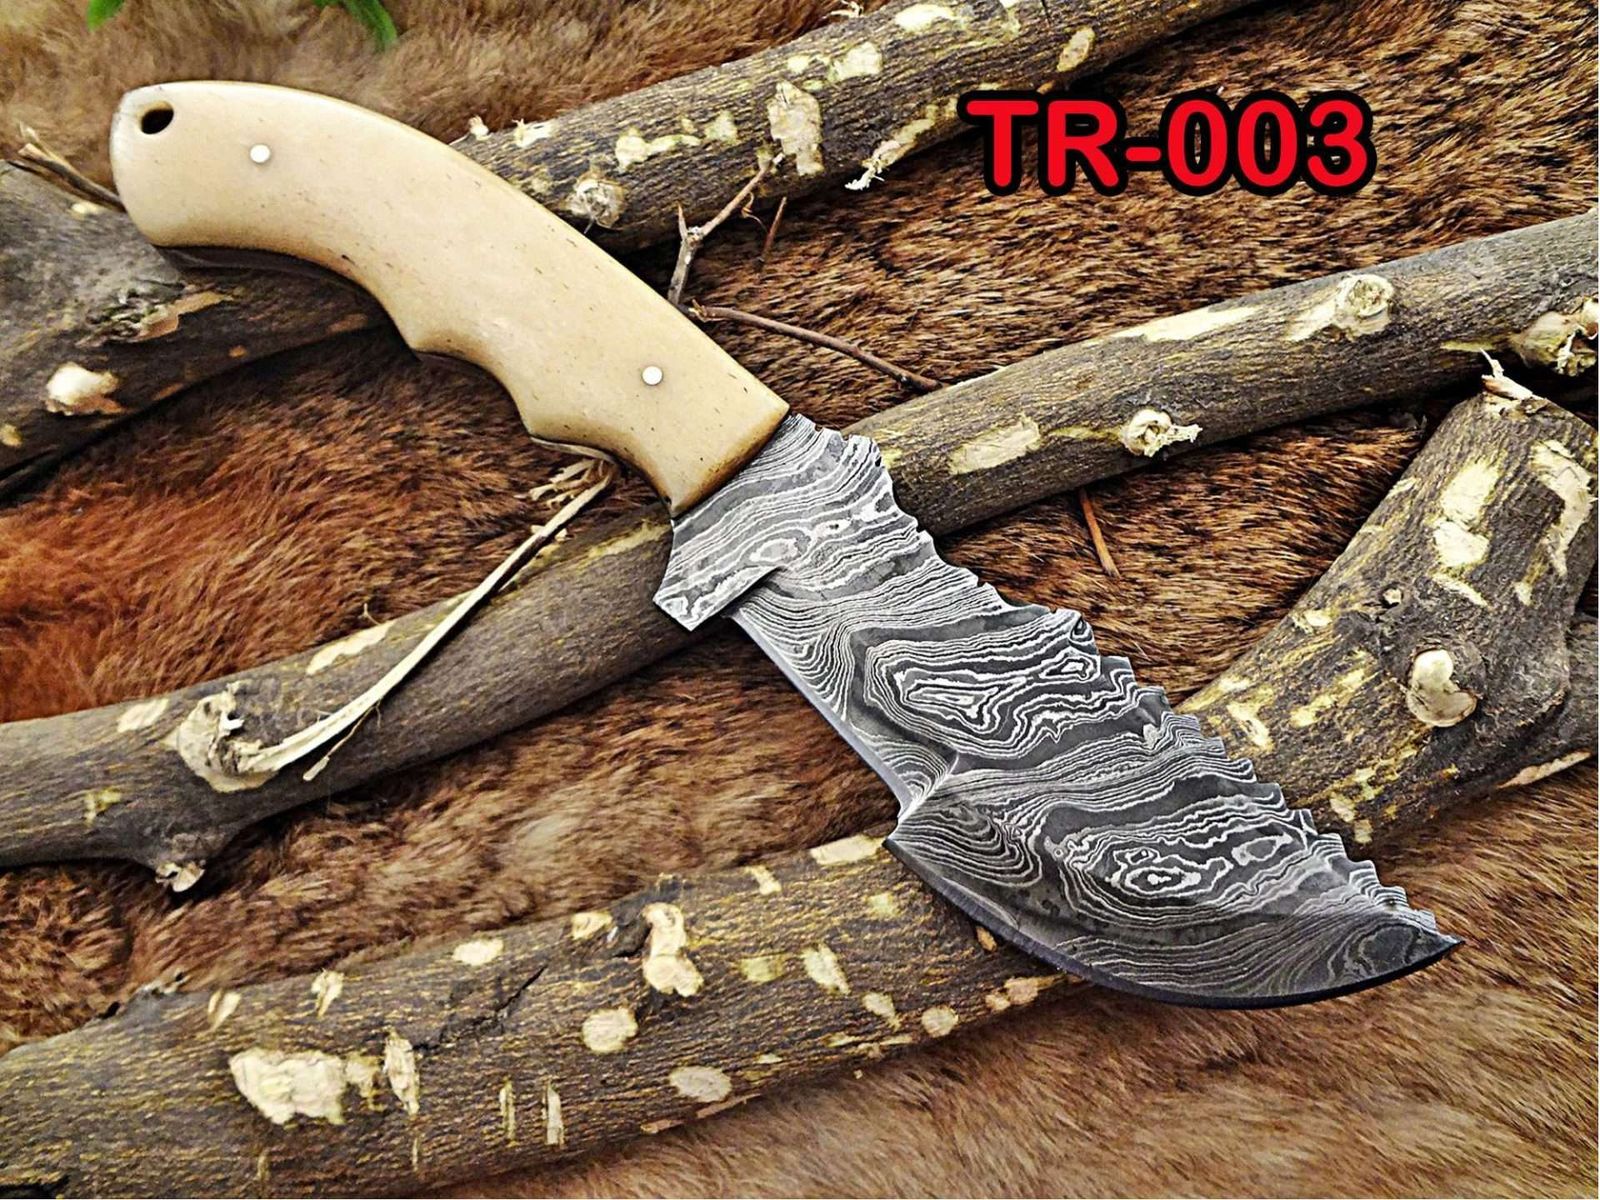 10"Long tracker knife hand forged twist pattern full tang Damascus steel, Natural Camel bone hole scale, Cow hide leather sheath